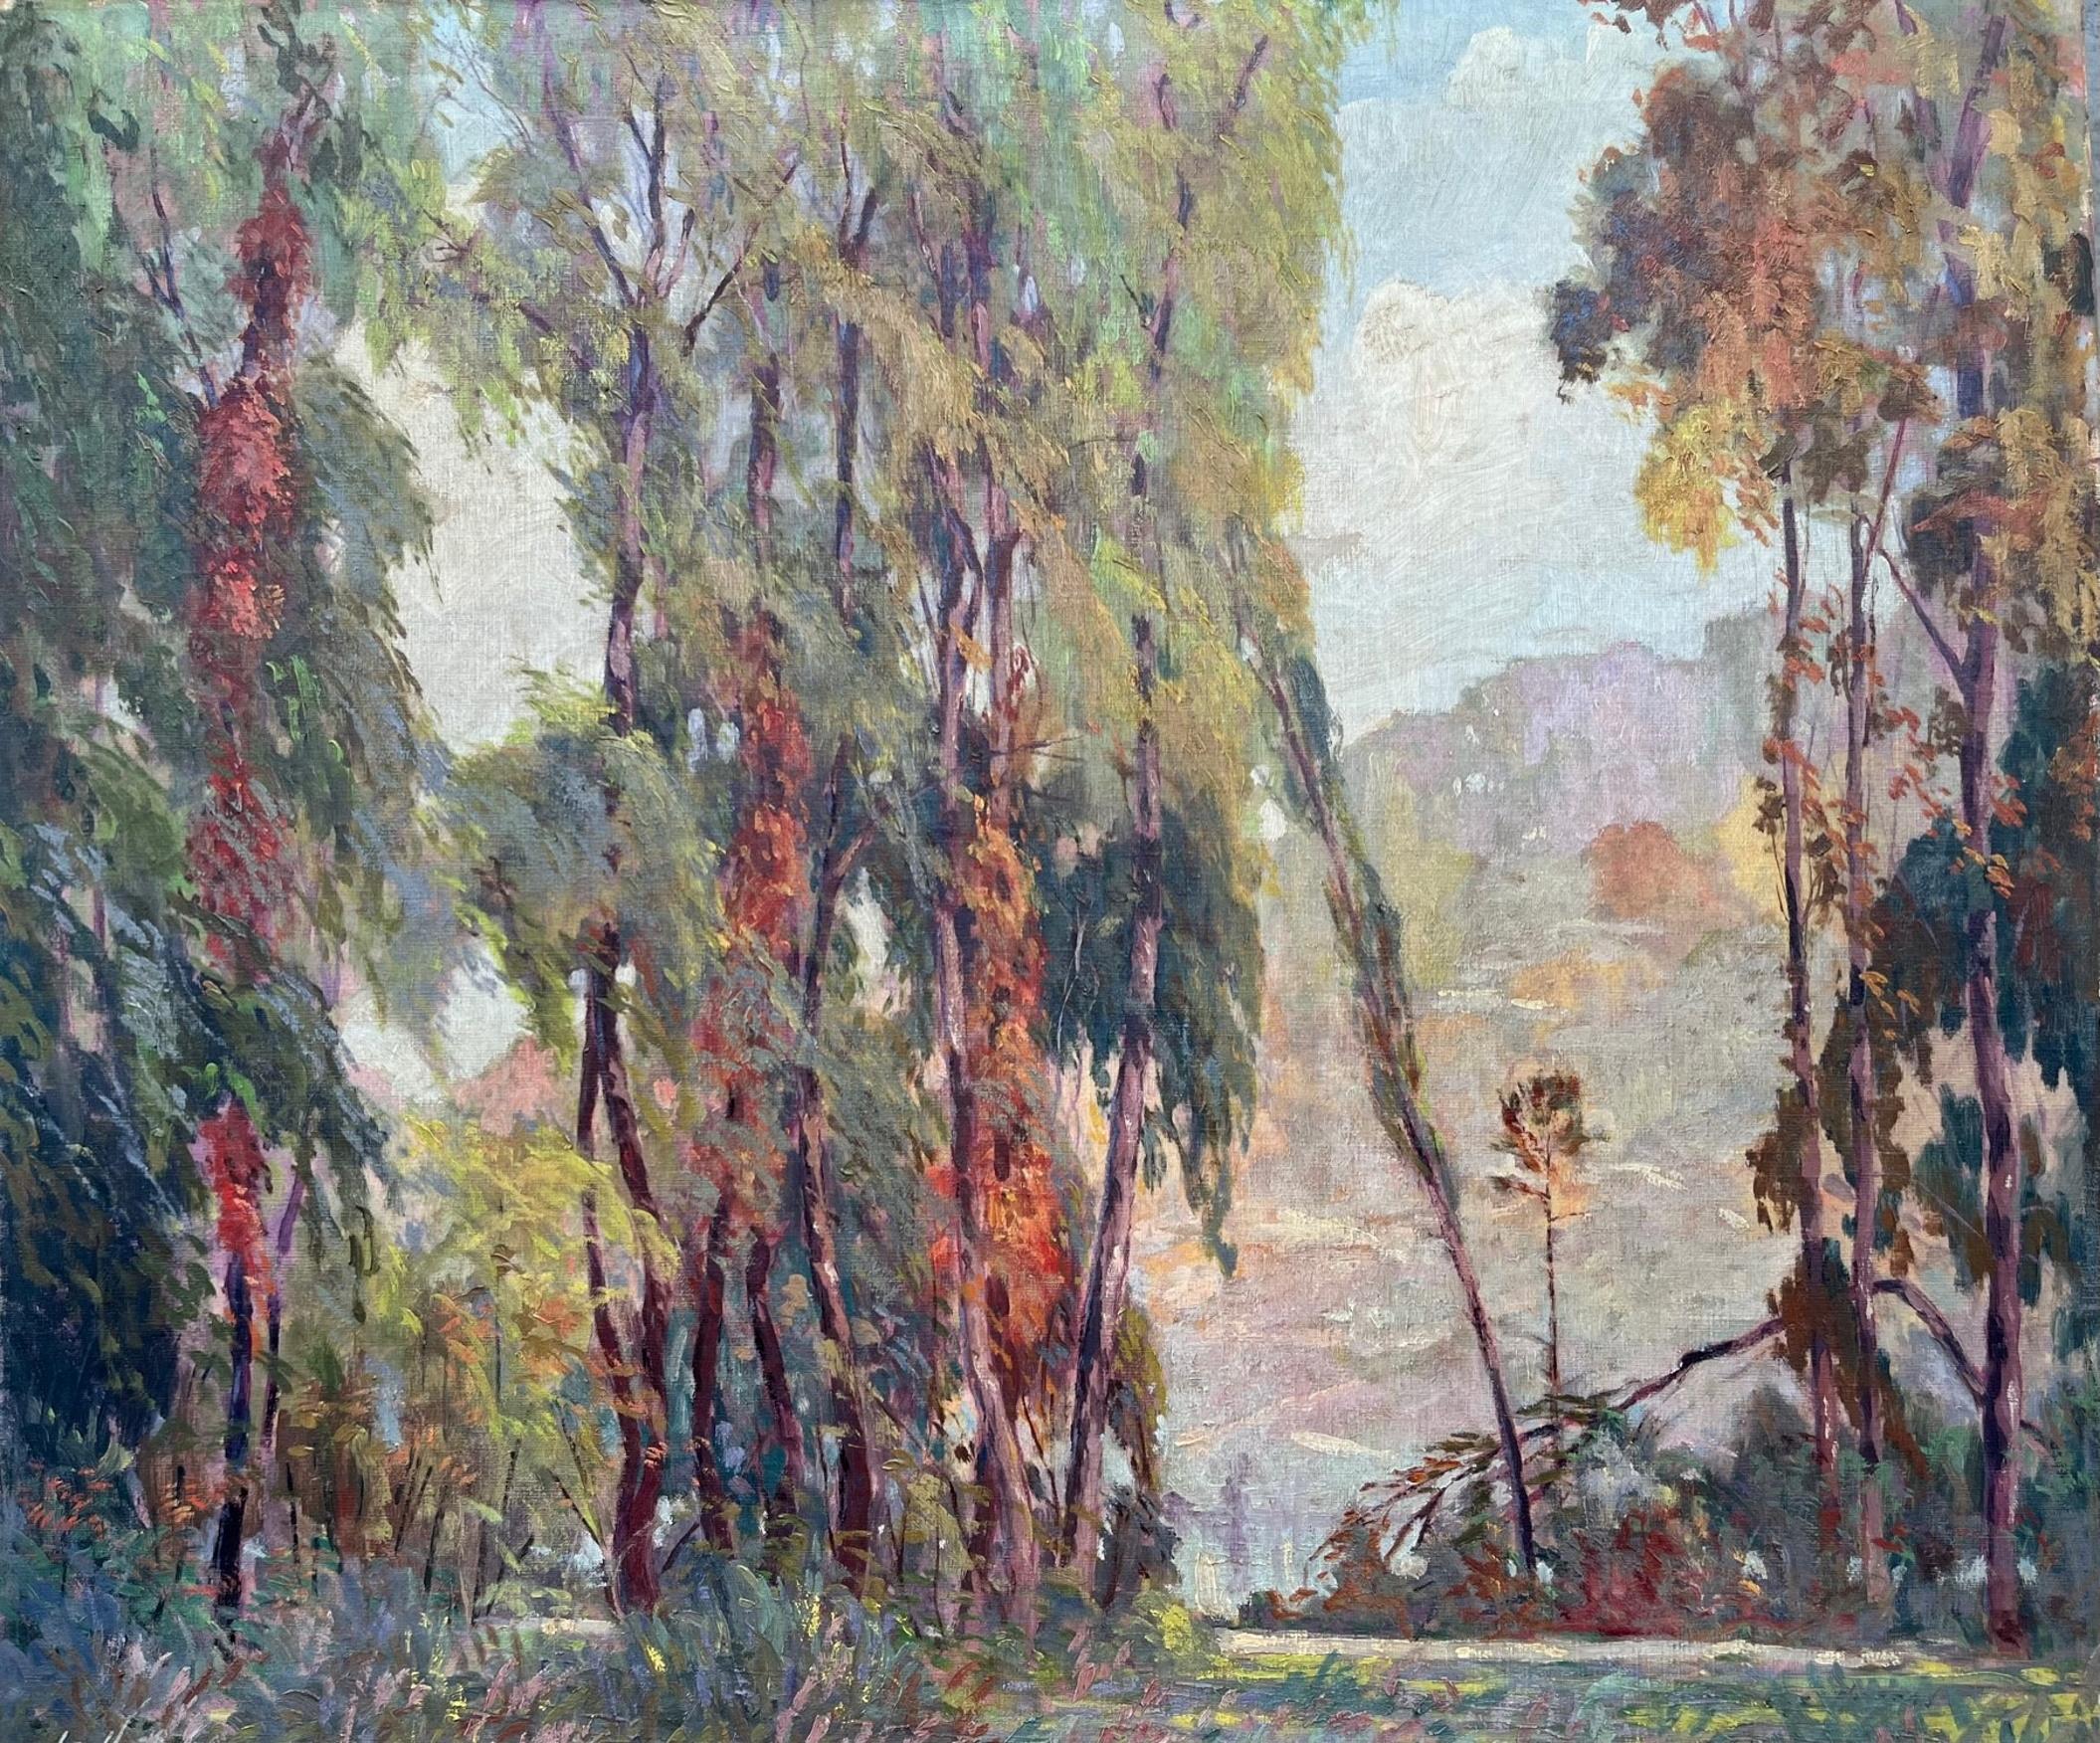 Arts & crafts impressionist landscape painting, Chicago Artist, 1926

This painting is a perfect example of the Arts & Crafts movement. It is a mature work of art and it shows skill and imagination. The landscape painting depicts a scene titled, “